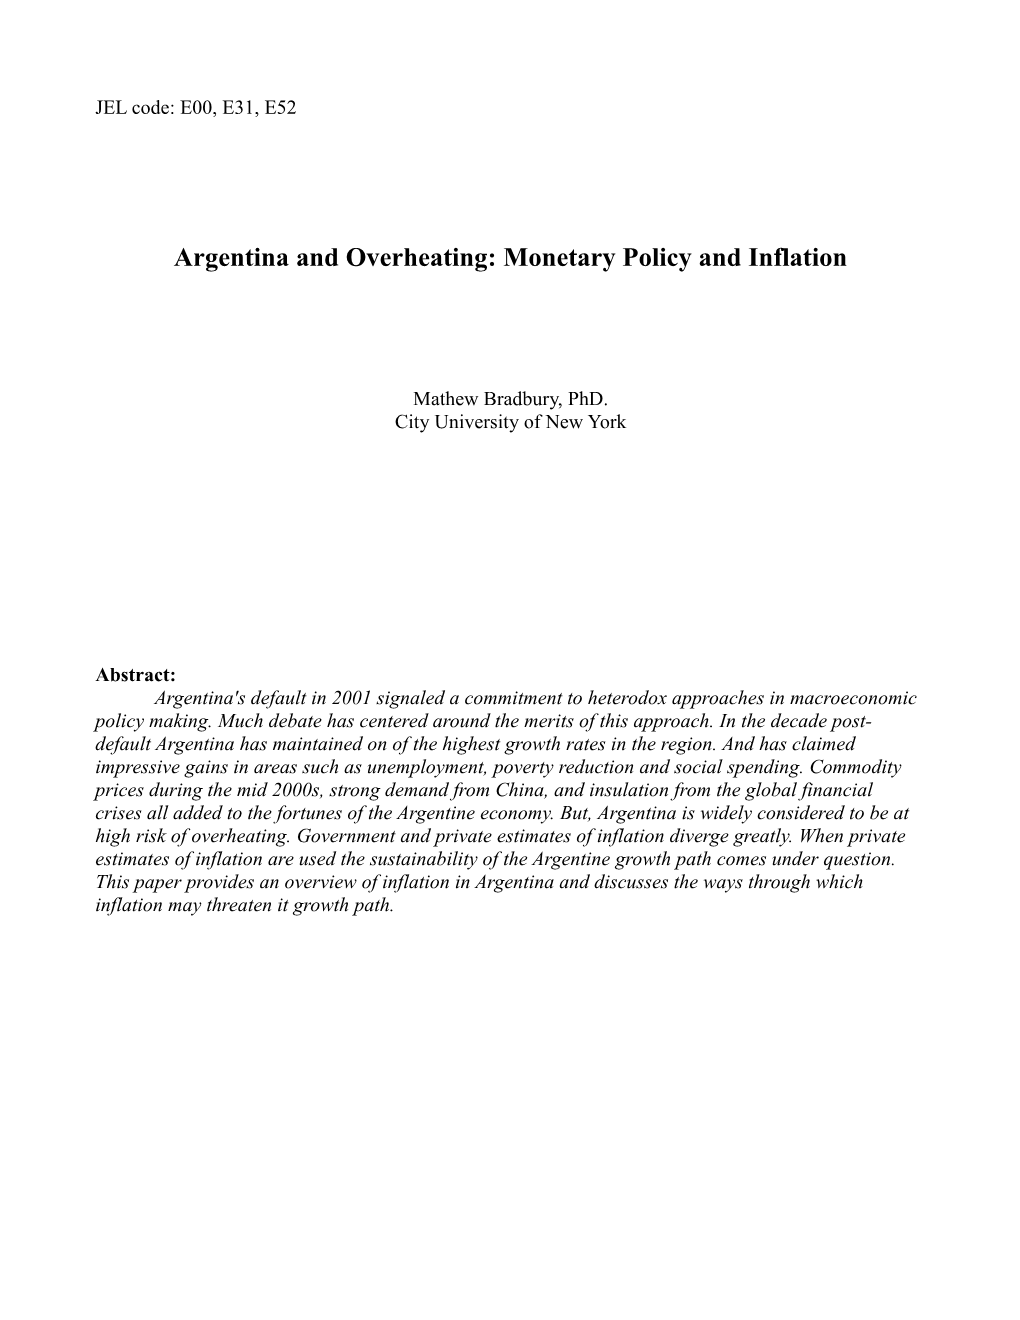 Argentina and Overheating: Monetary Policy and Inflation